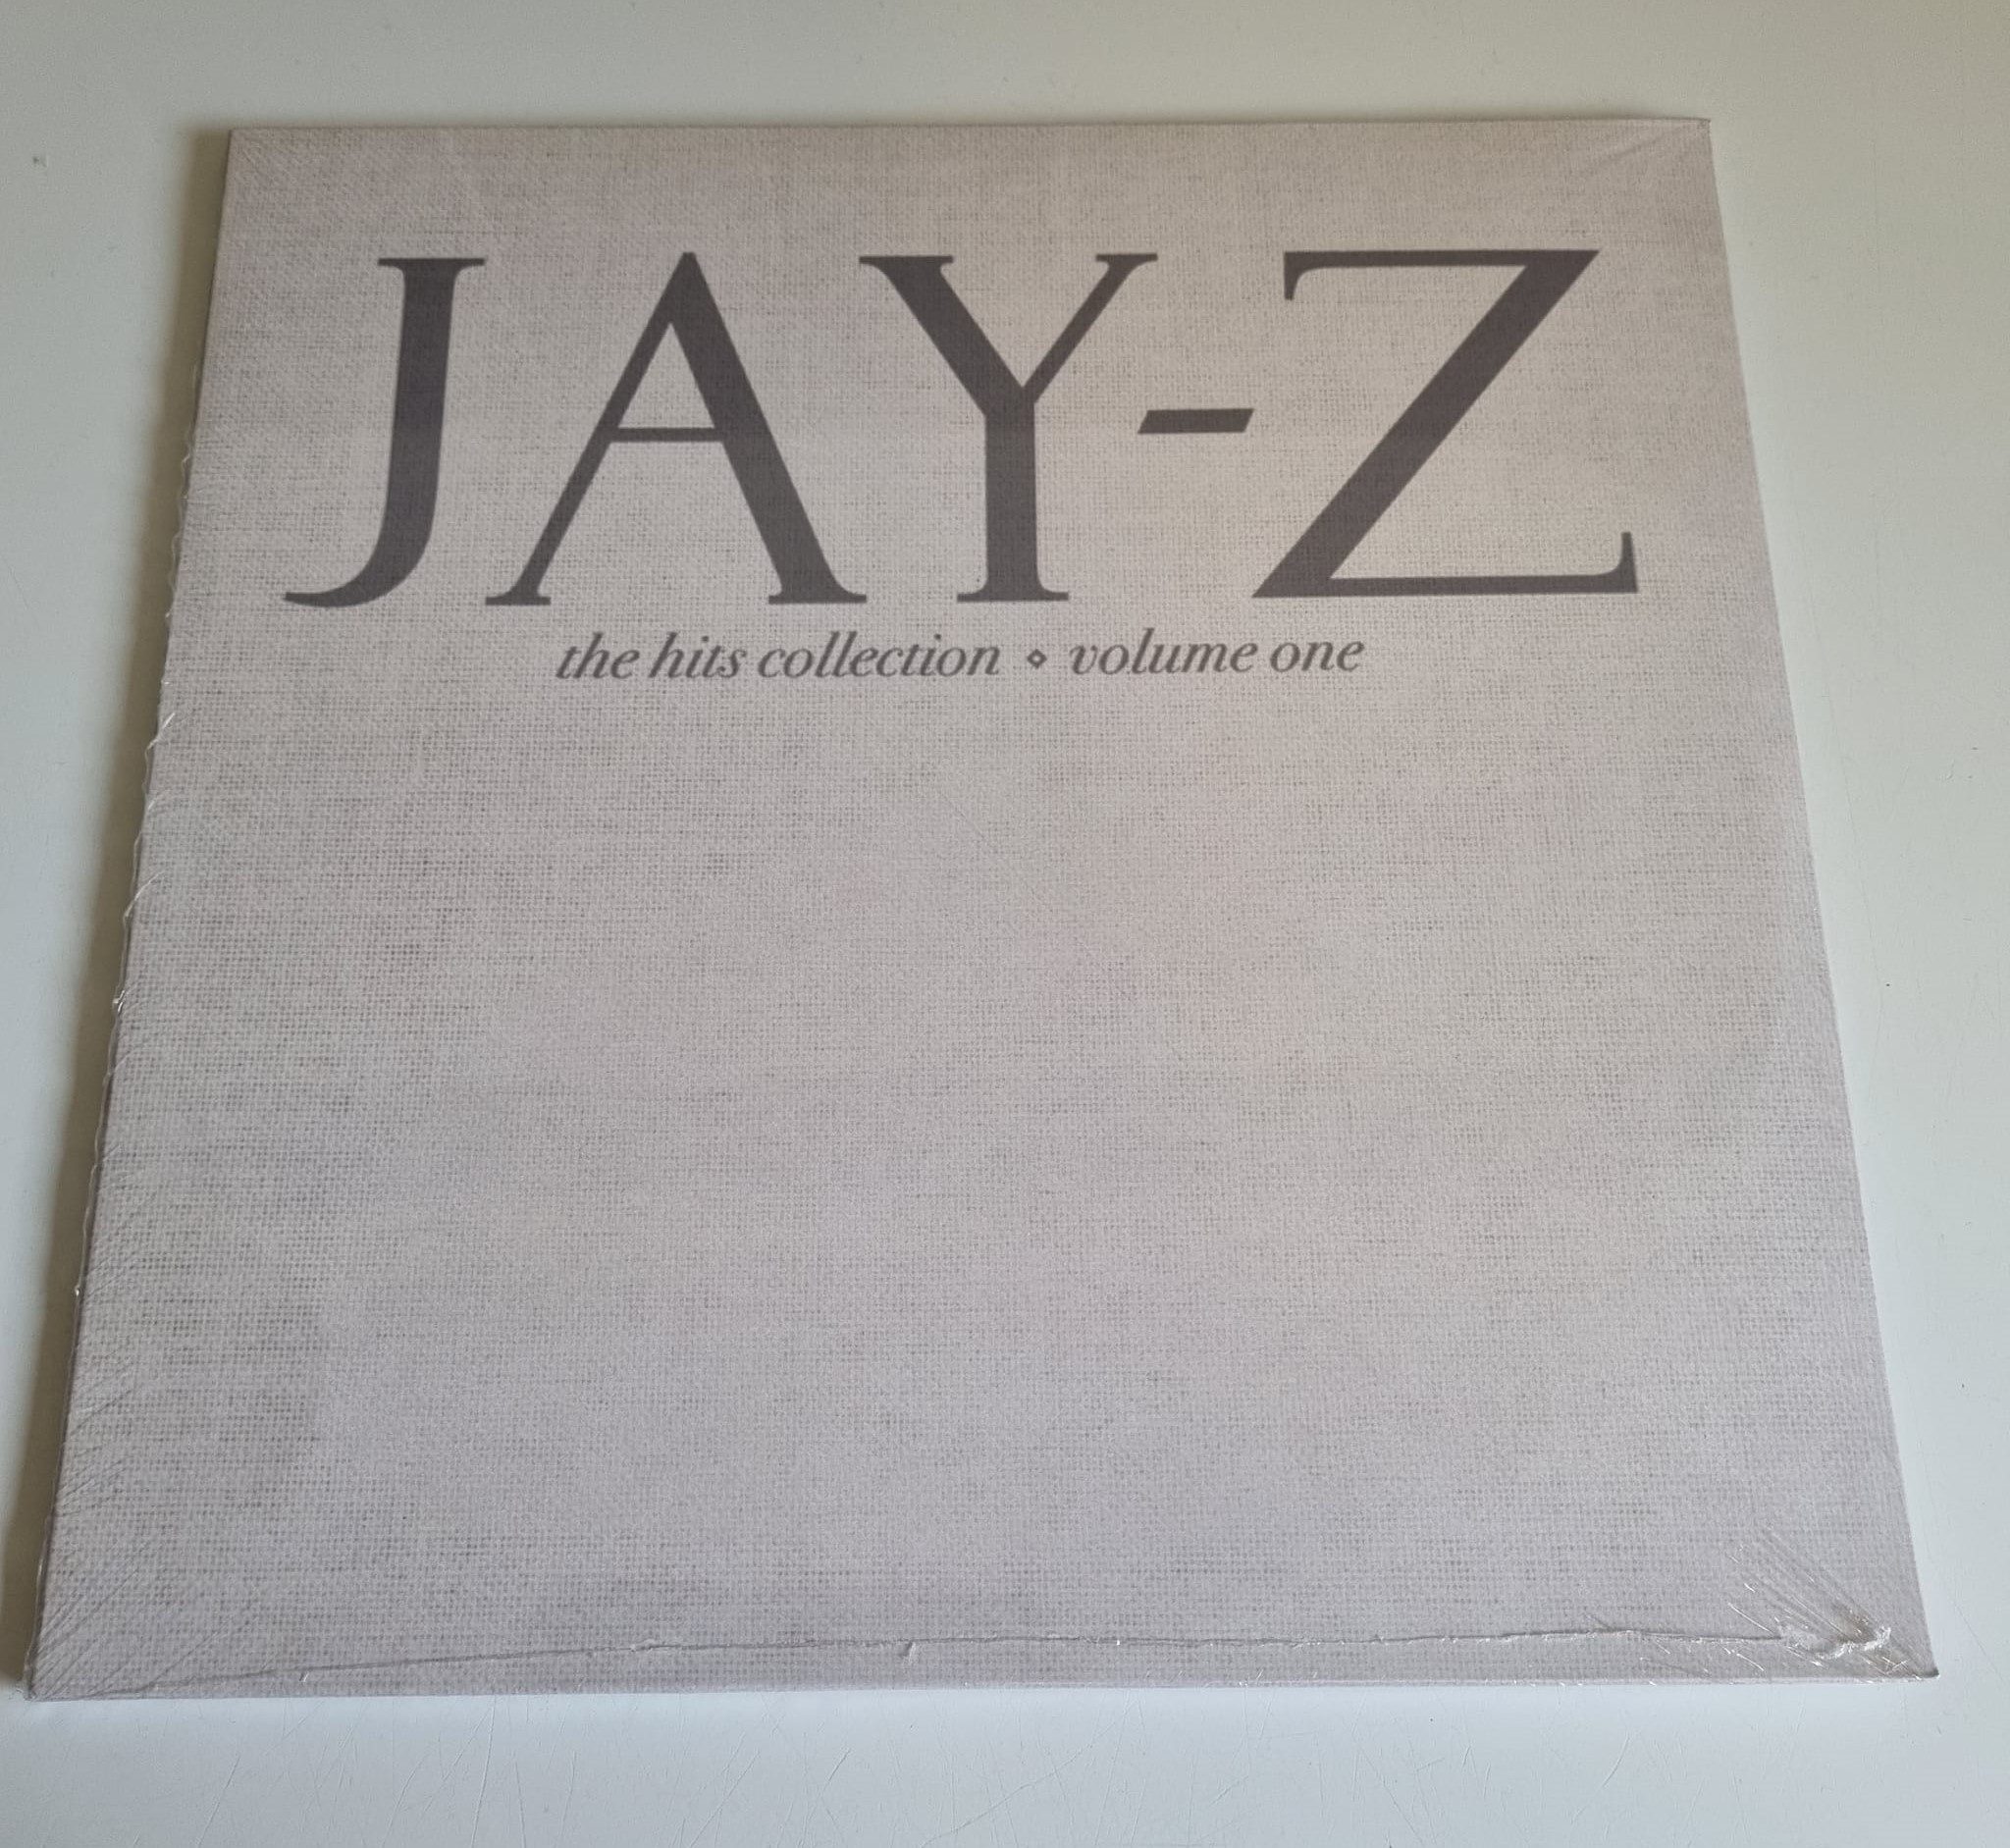 Buy this rare Jay-Z record by clicking here